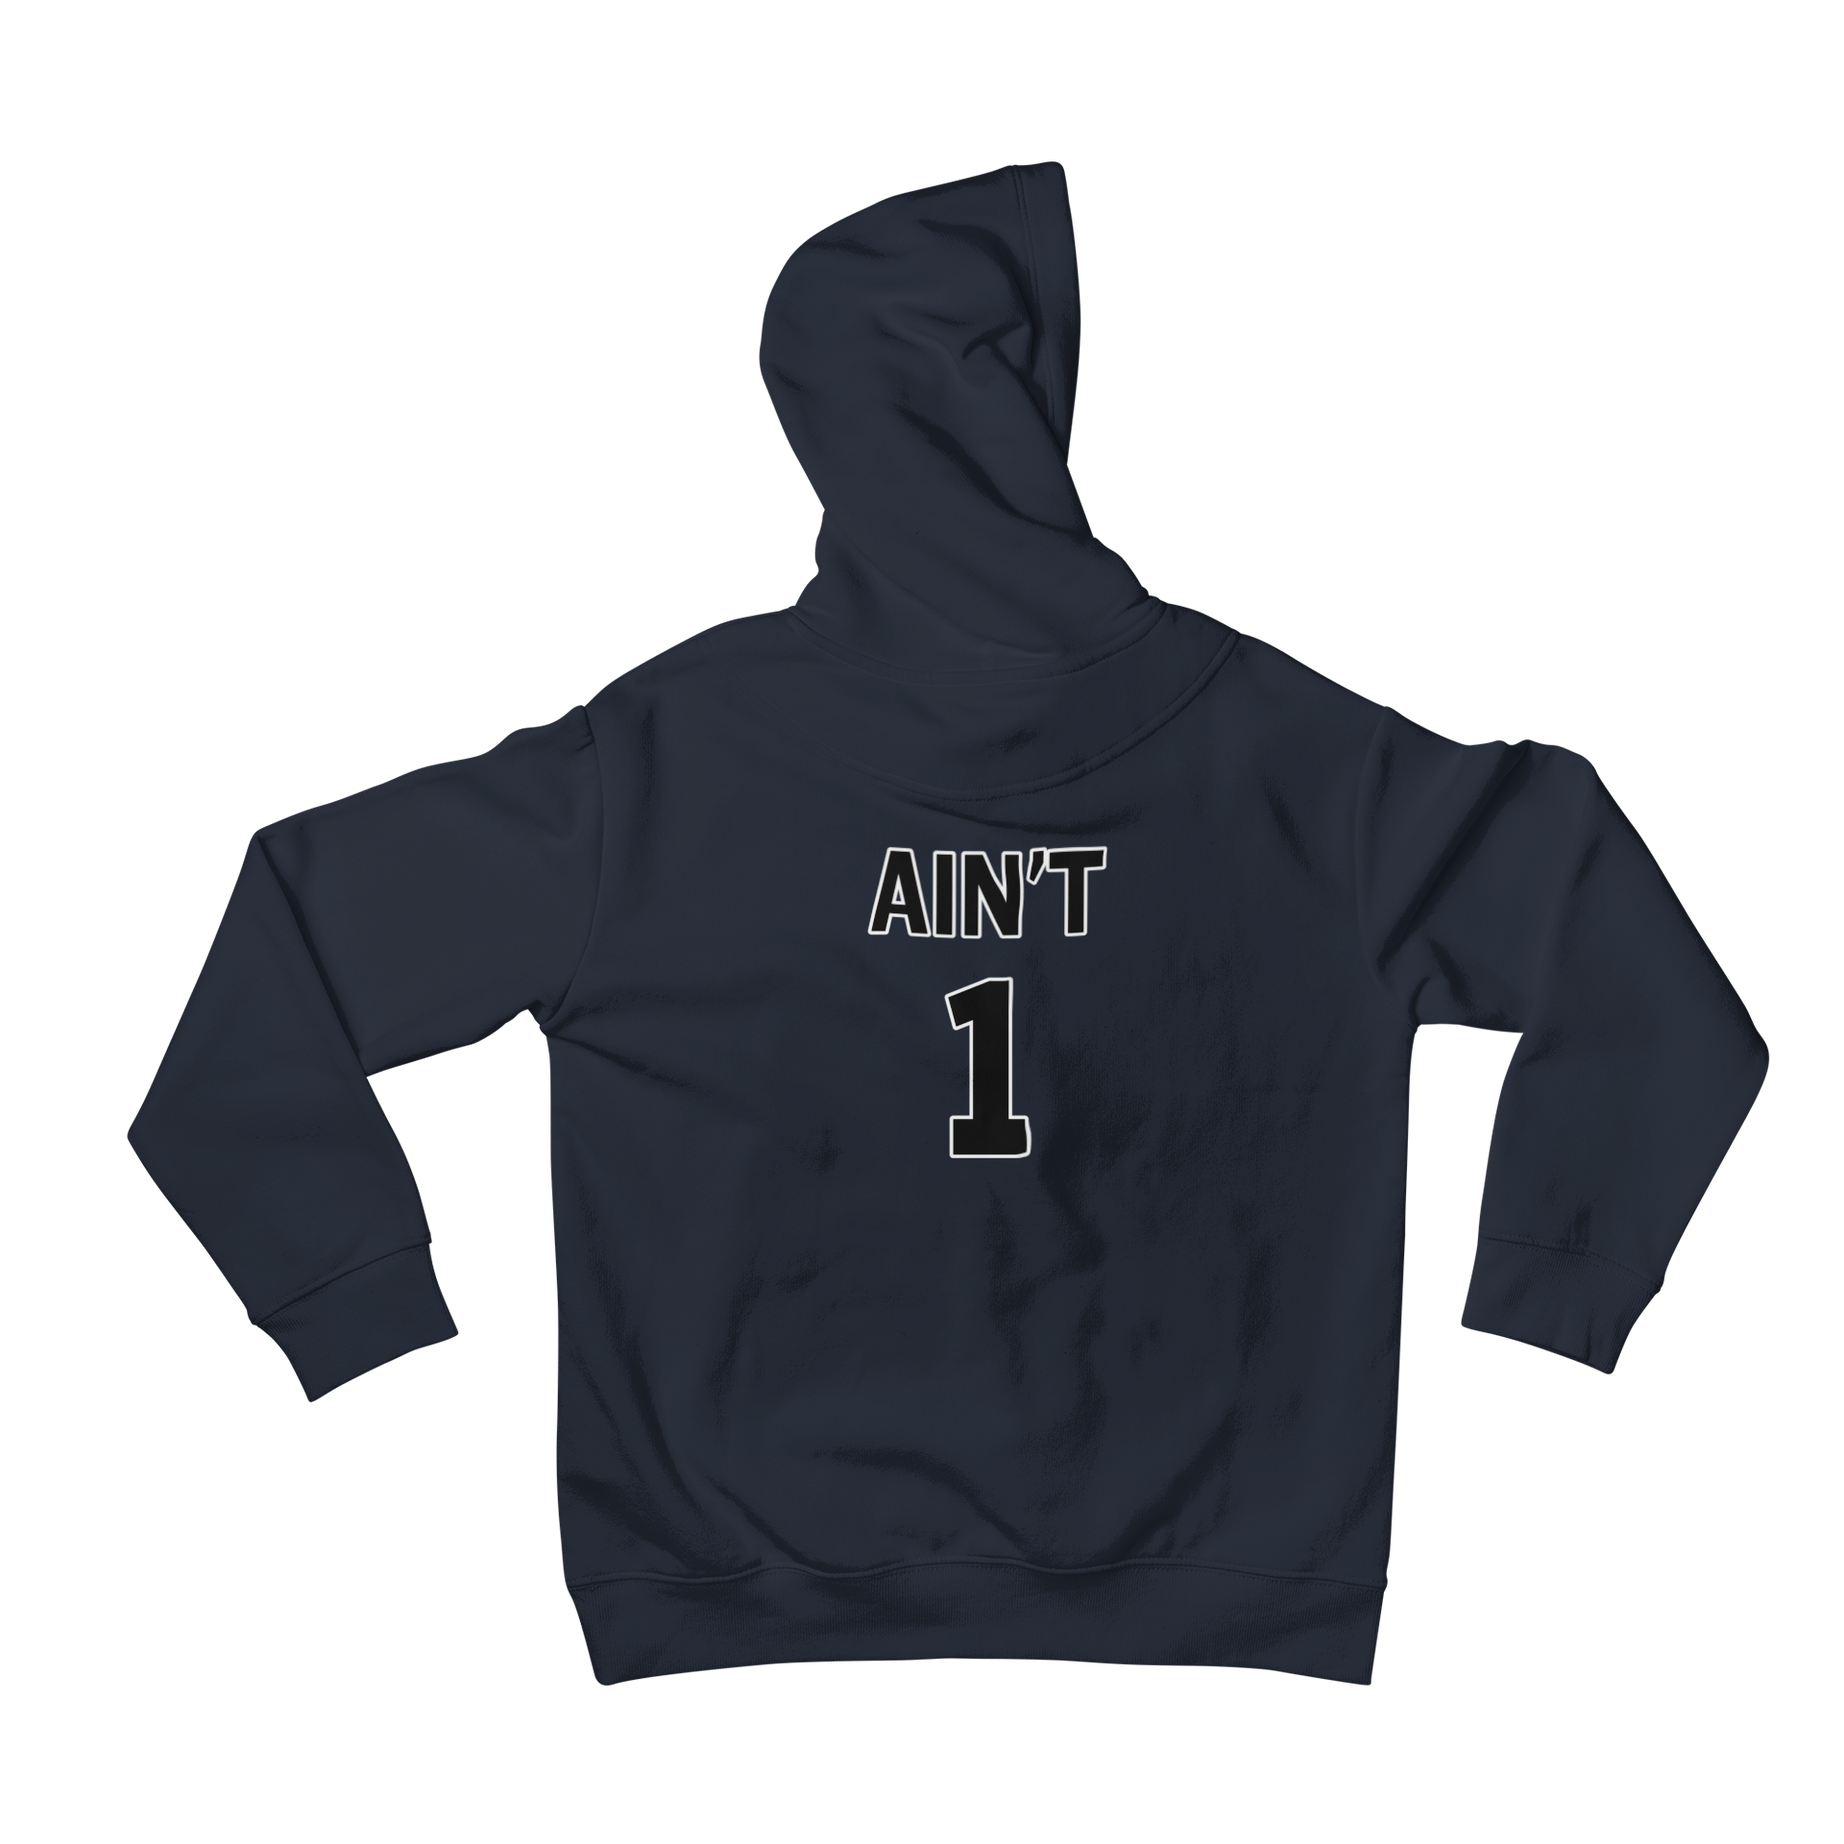 Stay stylish and make a statement with our 99 Probs Ain't 1 matching hoodie. Featuring a bold slogan, "Ain't 1," this hoodie is not only a fashion statement, but also a symbol of empowerment. Perfectly paired with our 99 Problems hoodie, it's the ultimate duo for any outfit.